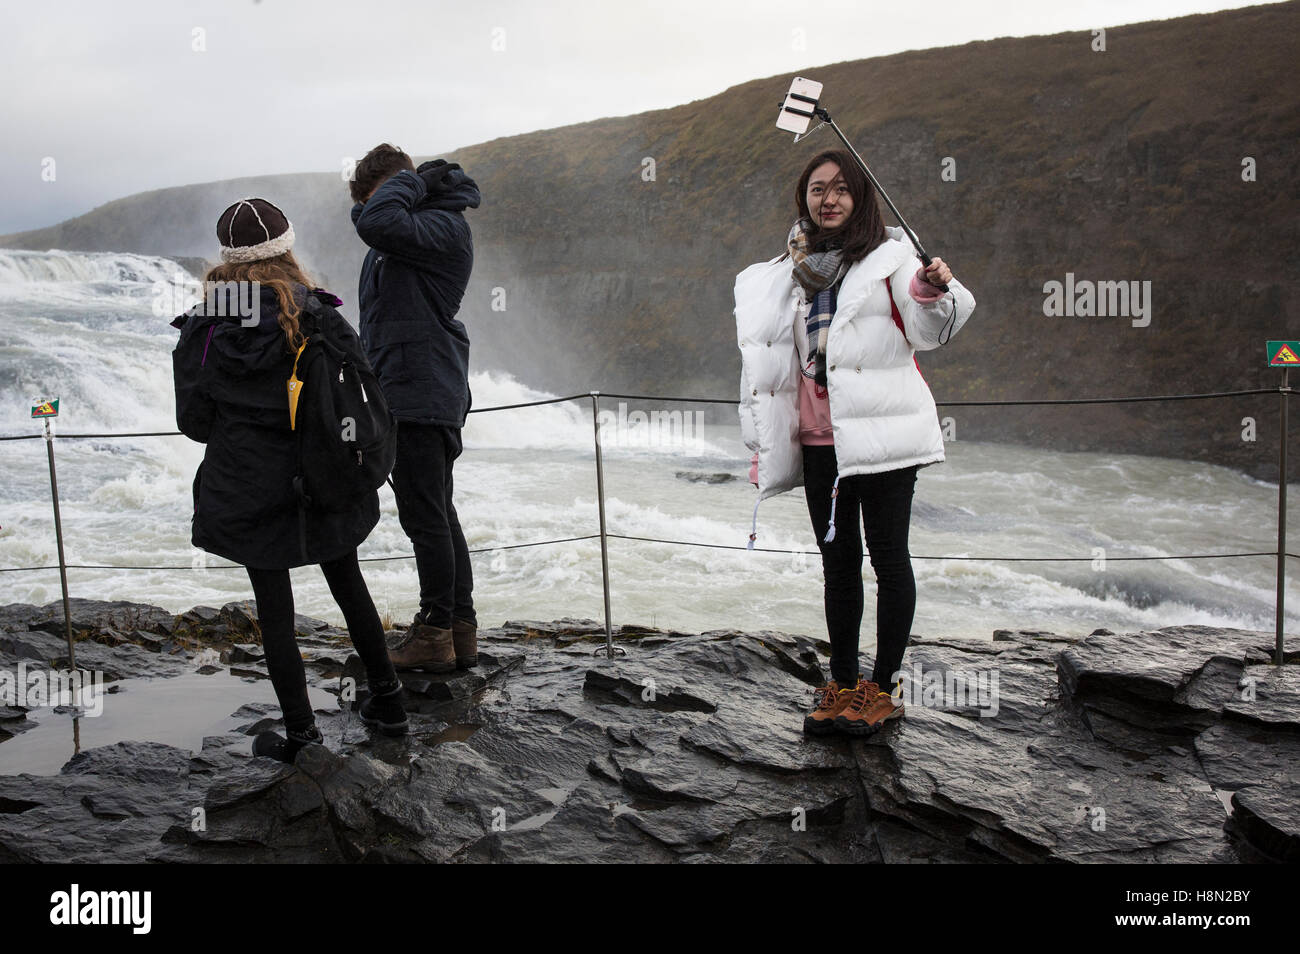 A woman takes a selfie with a selfie stick at Gullfoss waterfall in Iceland Stock Photo